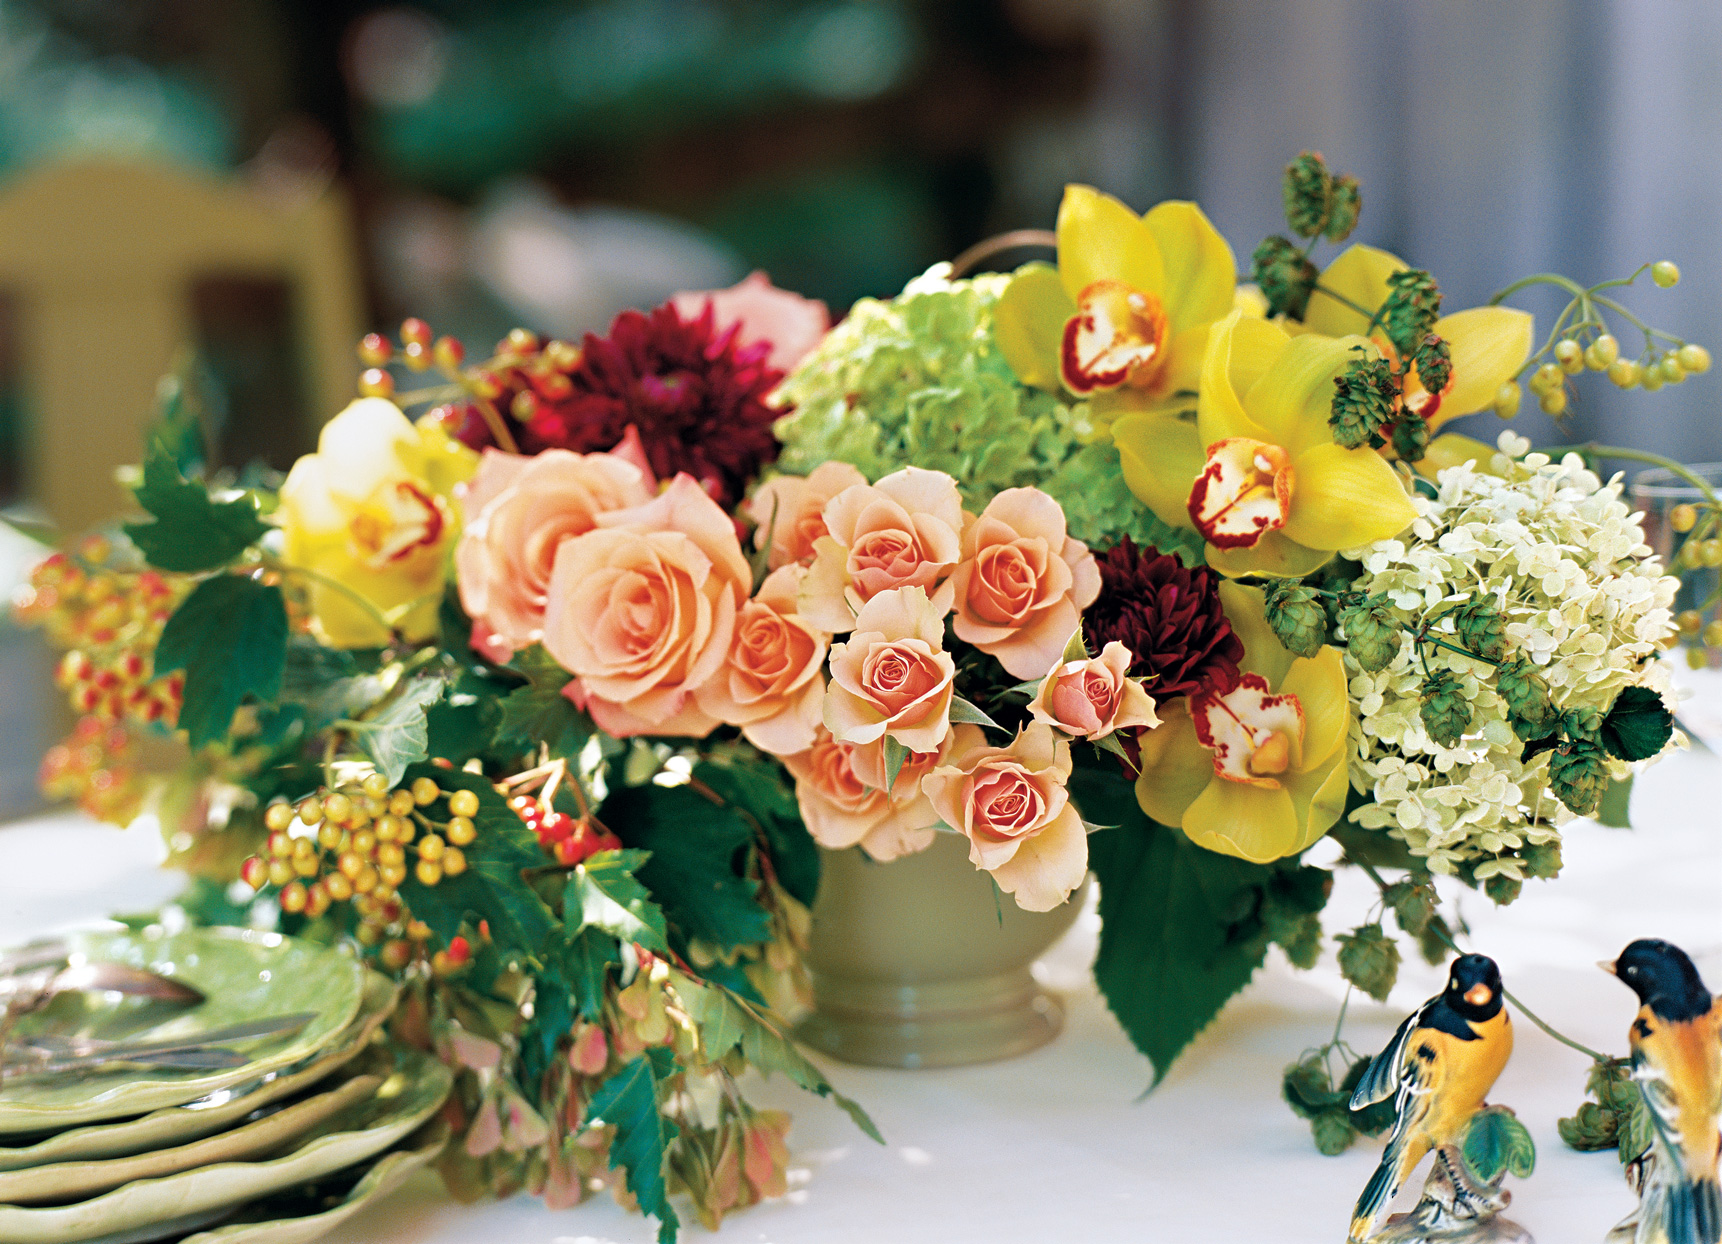 Create Beautiful Floral Arrangements With These Amazing Tips